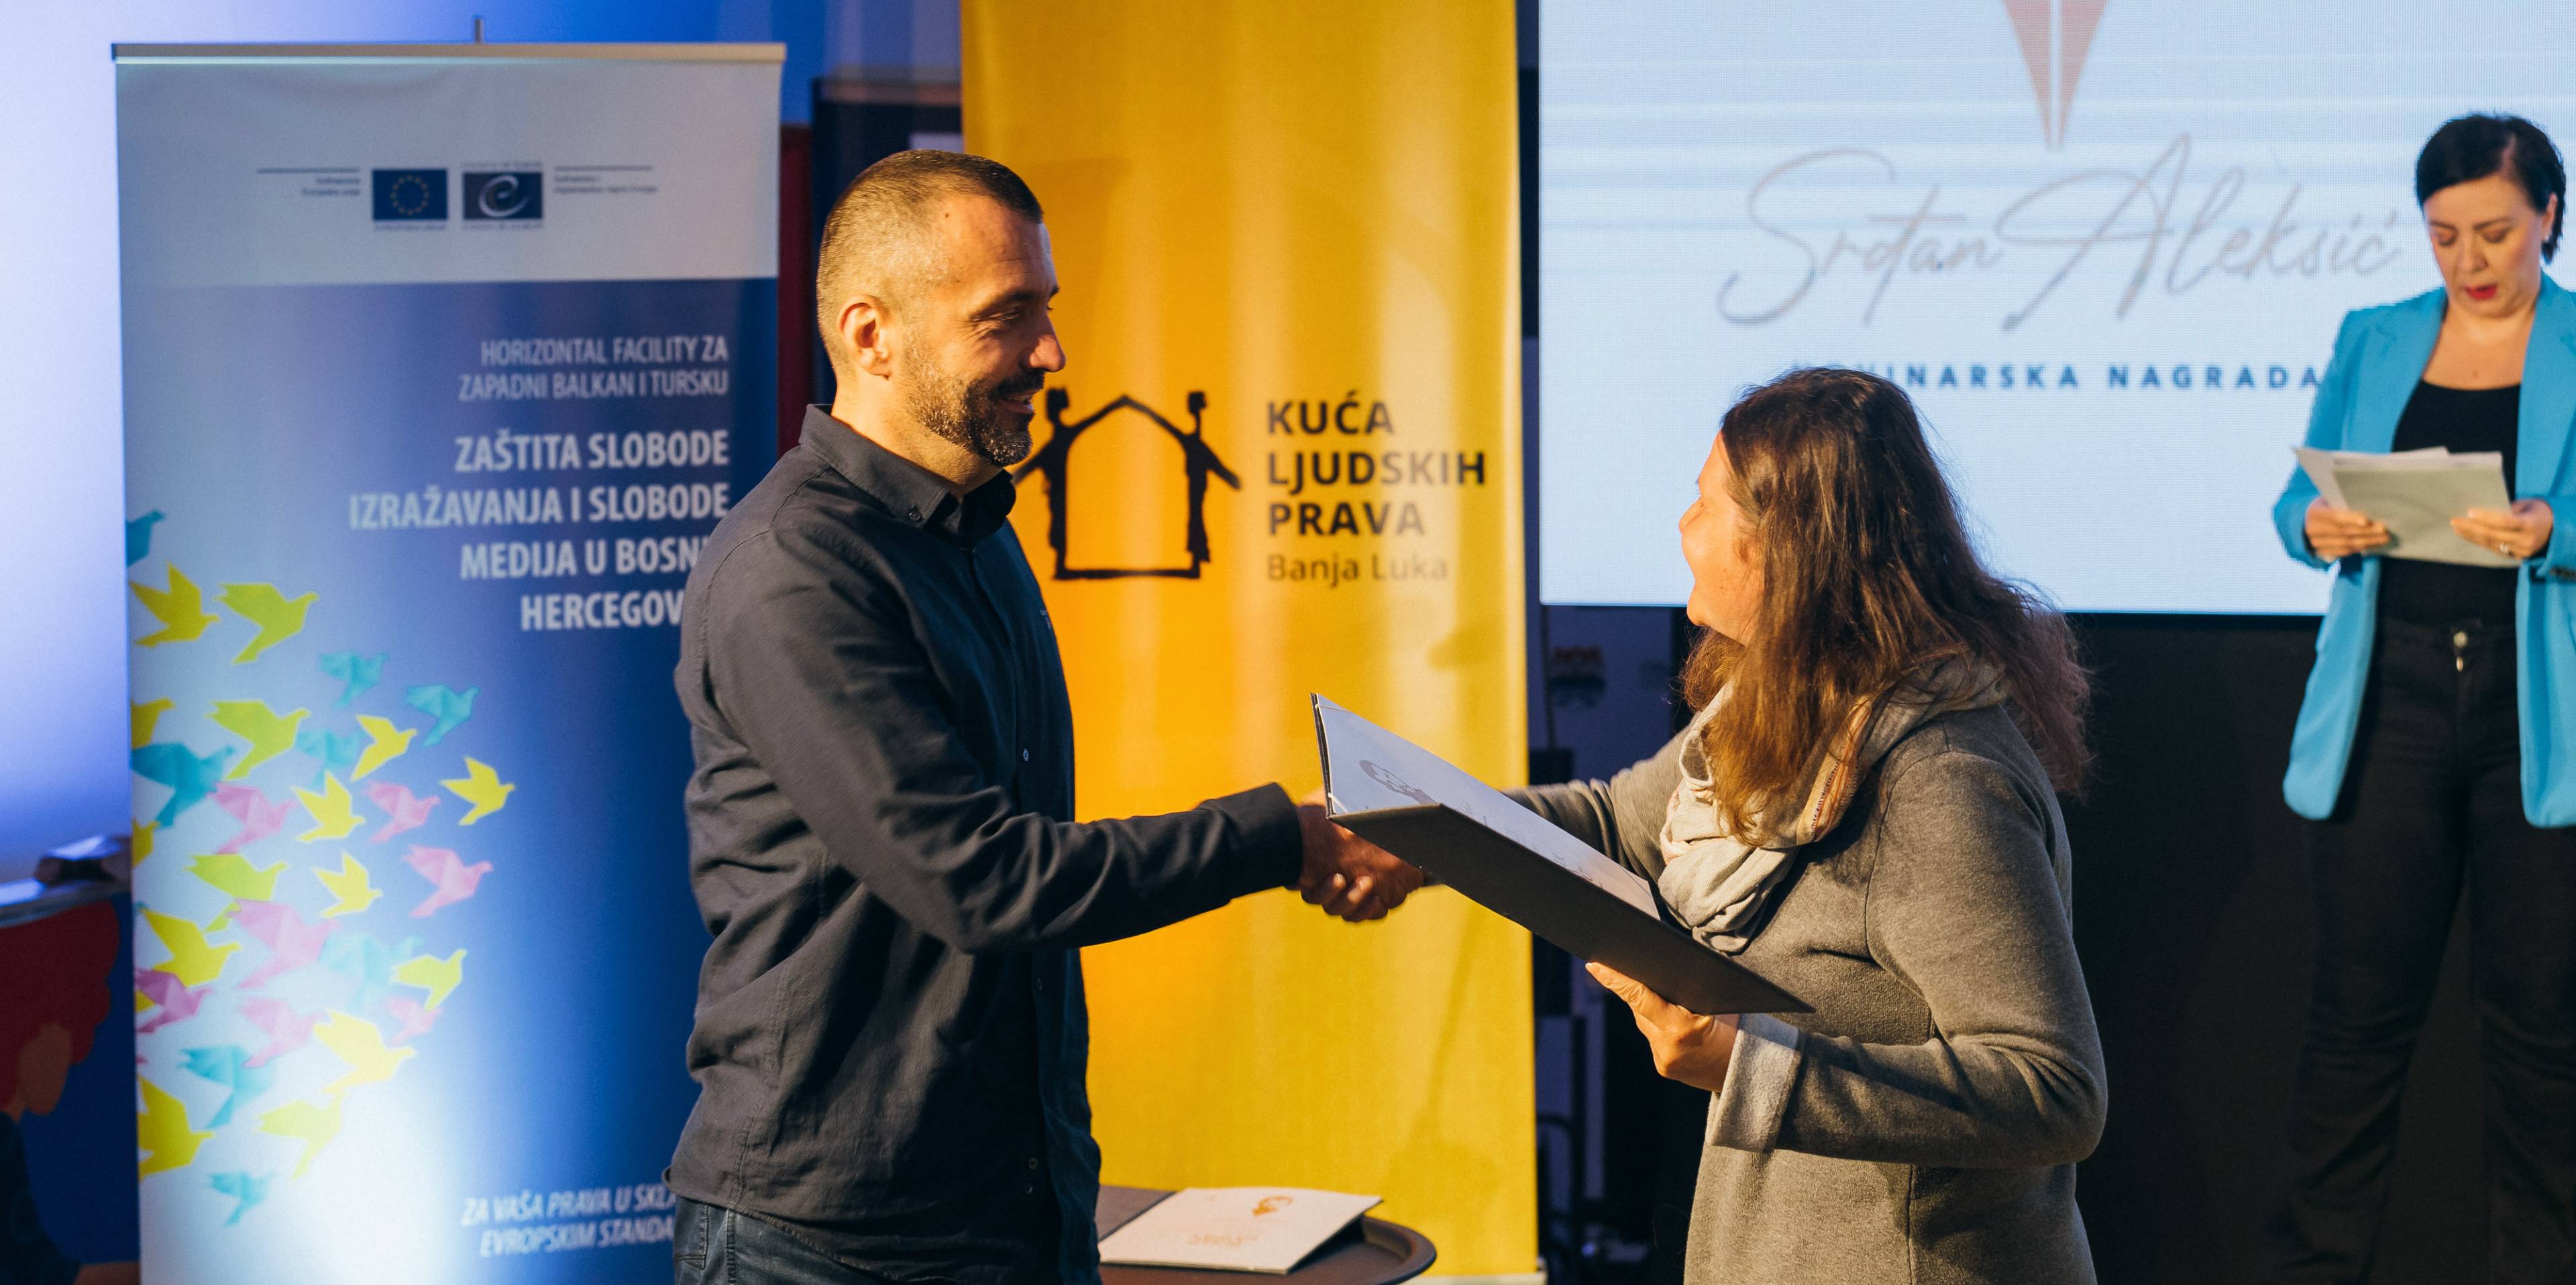 European Union and Council of Europe supported the "Srđan Aleksić" journalism award